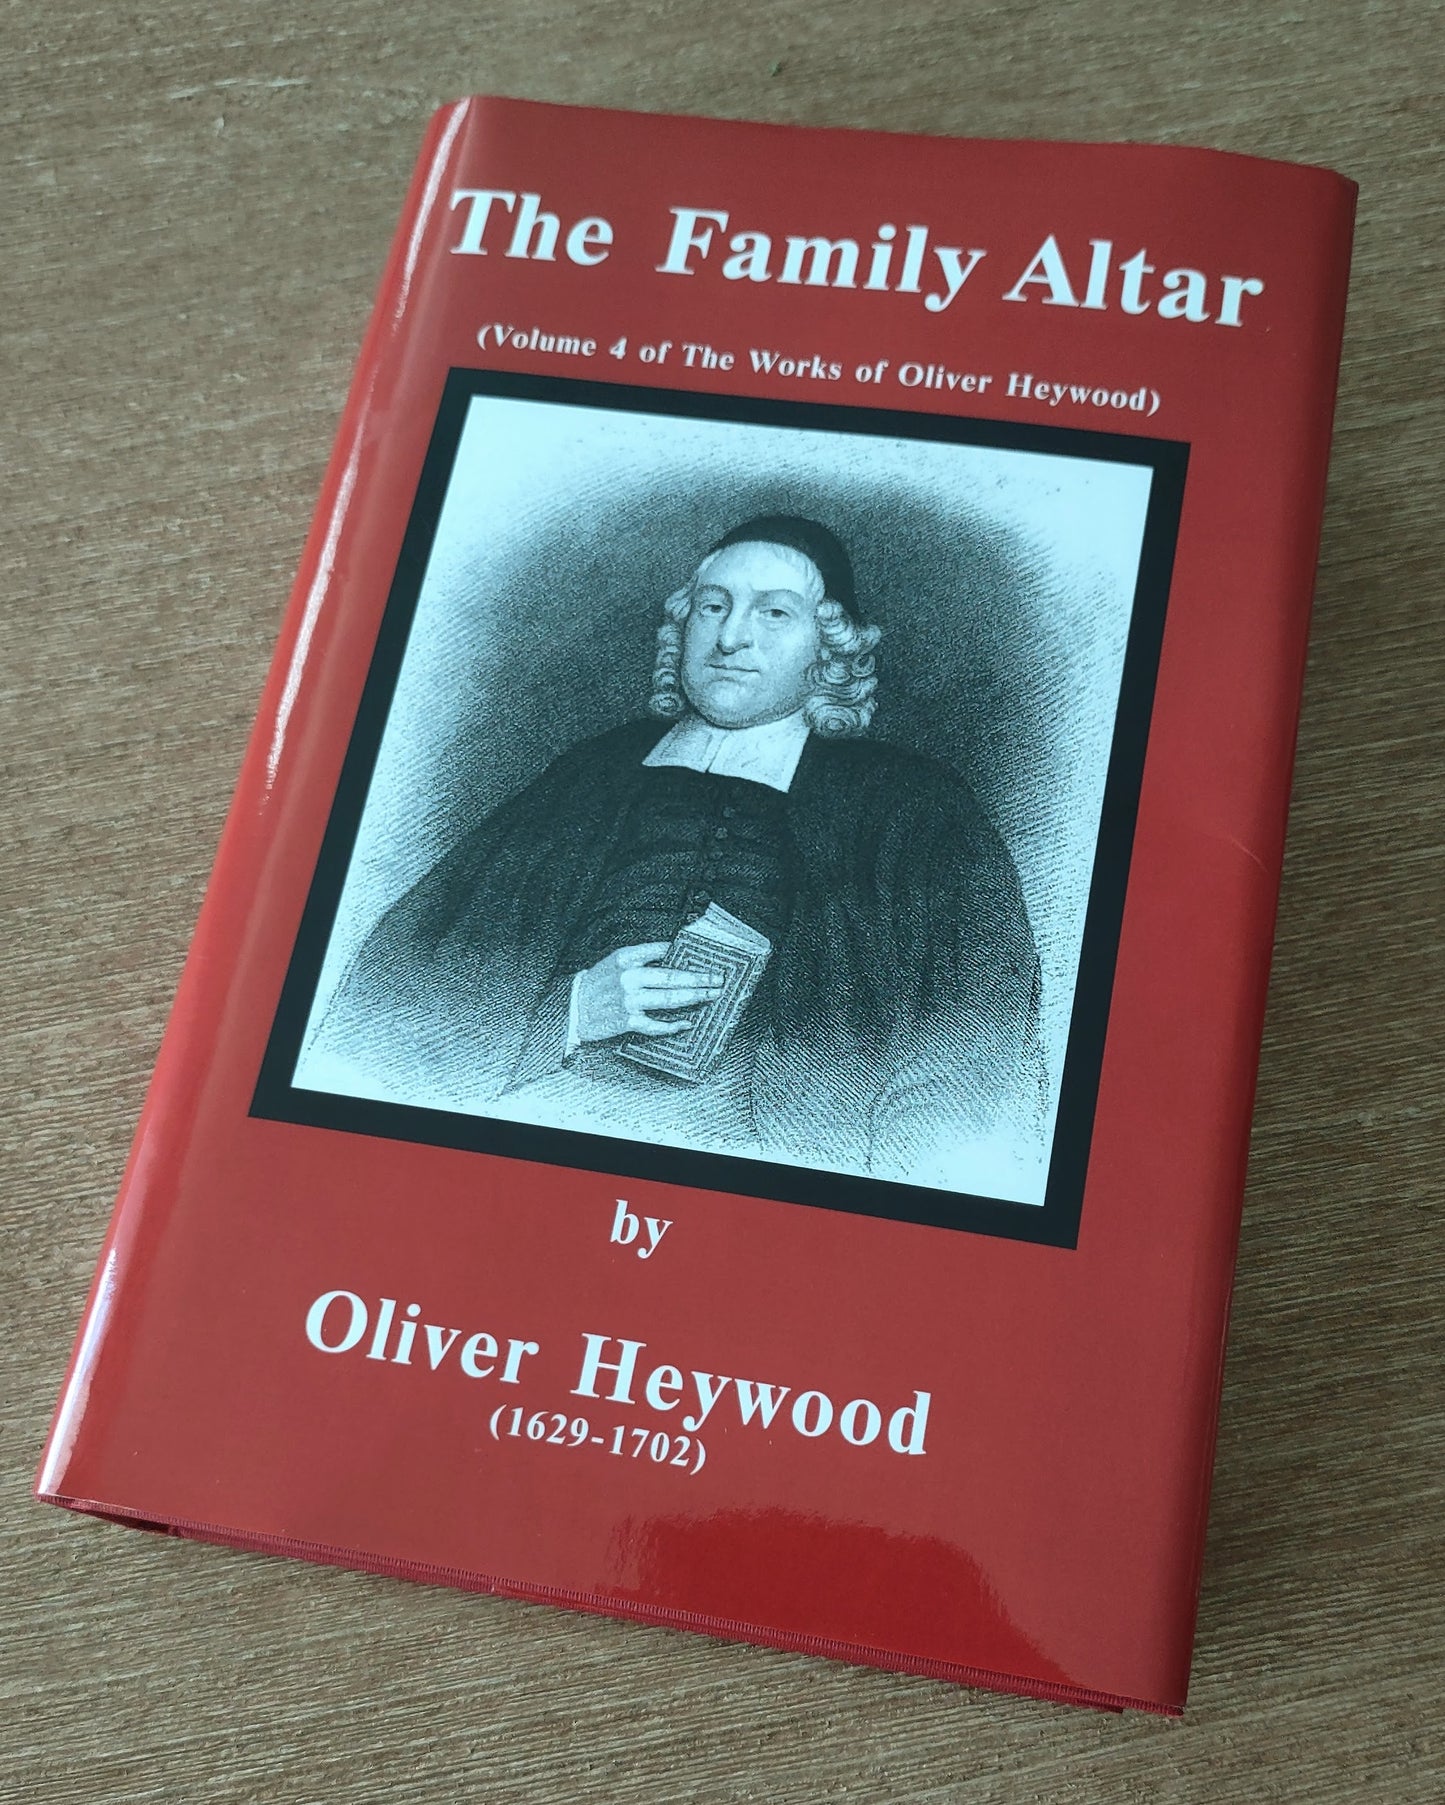 The Family Altar - Volume 4 of the Works of Oliver Heywood